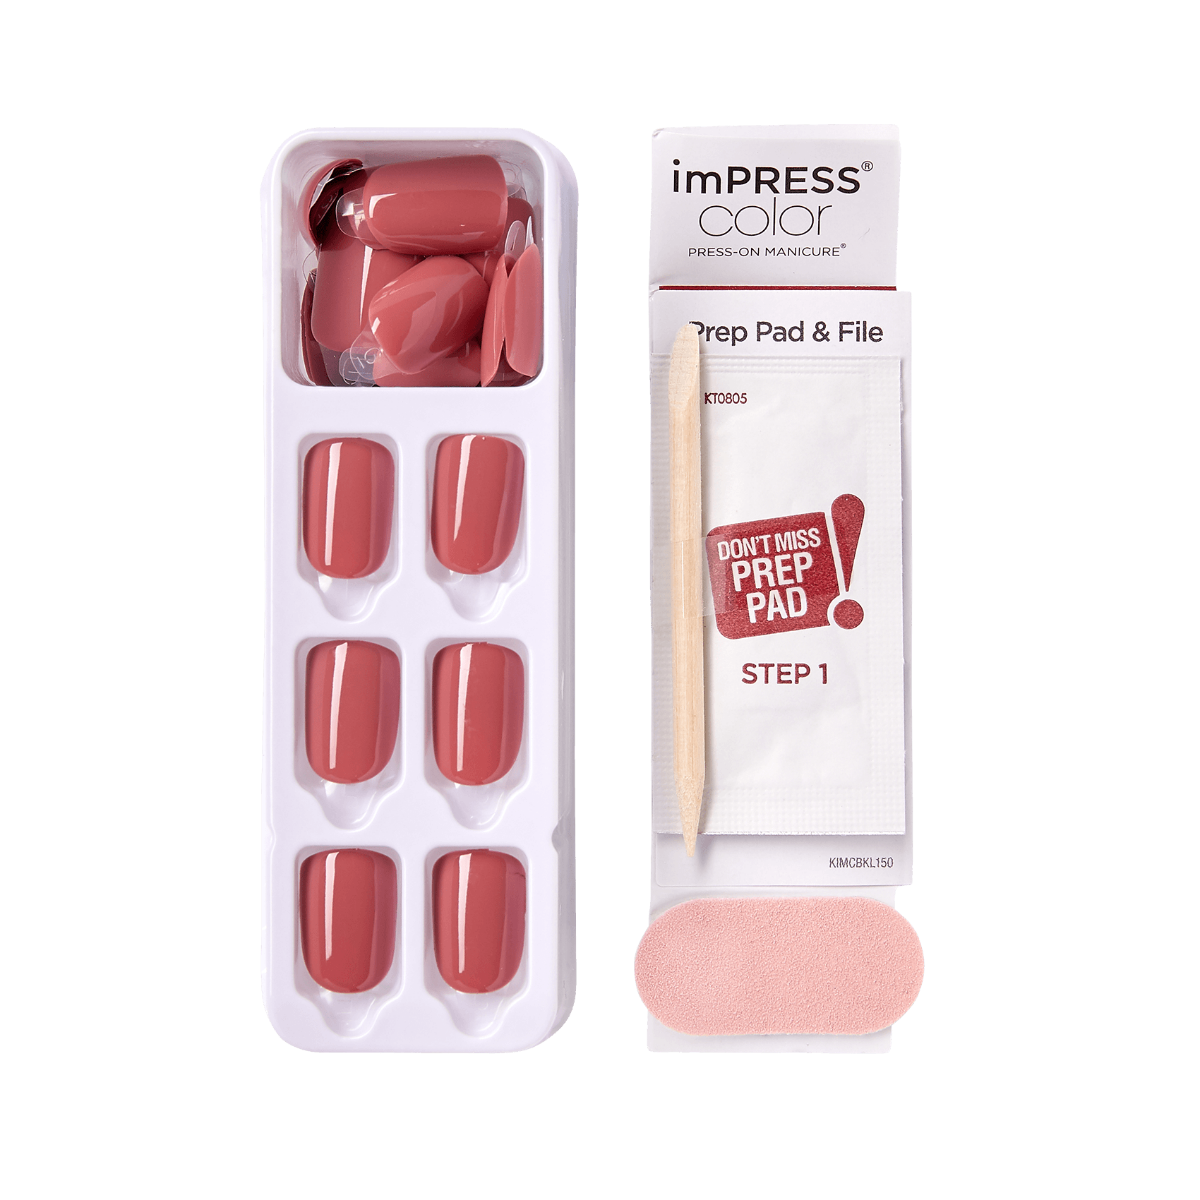 KISS ImPRESS Color Press-On Manicure - Platonic Pink - Taille S